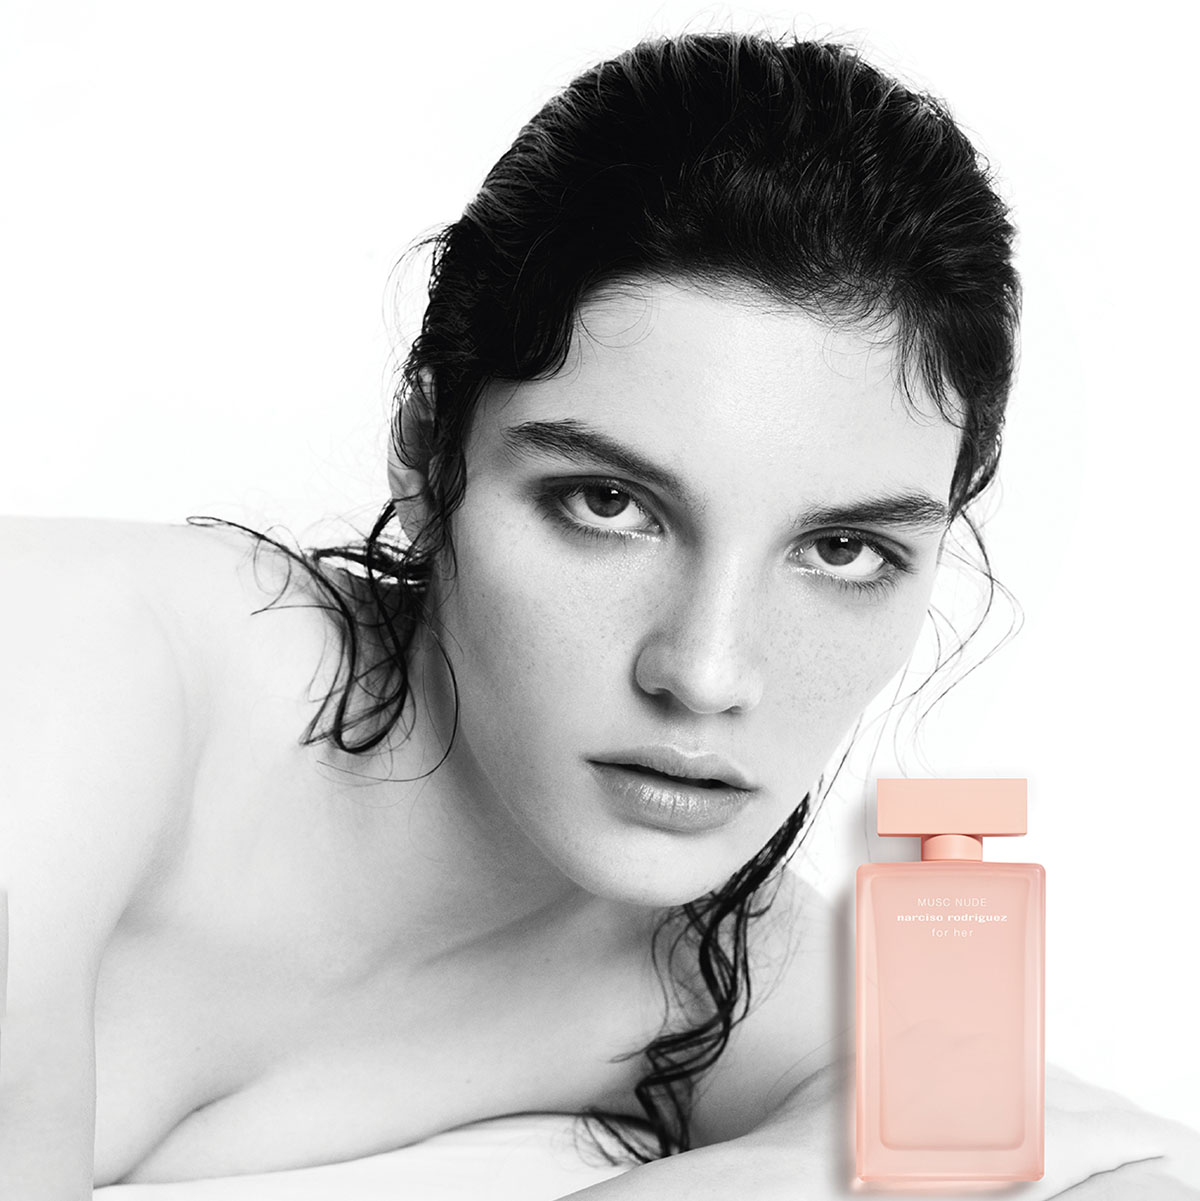 NƯỚC HOA NỮ NARCISO RODRIGUEZ MUSC NUDE FOR HER EDP 5